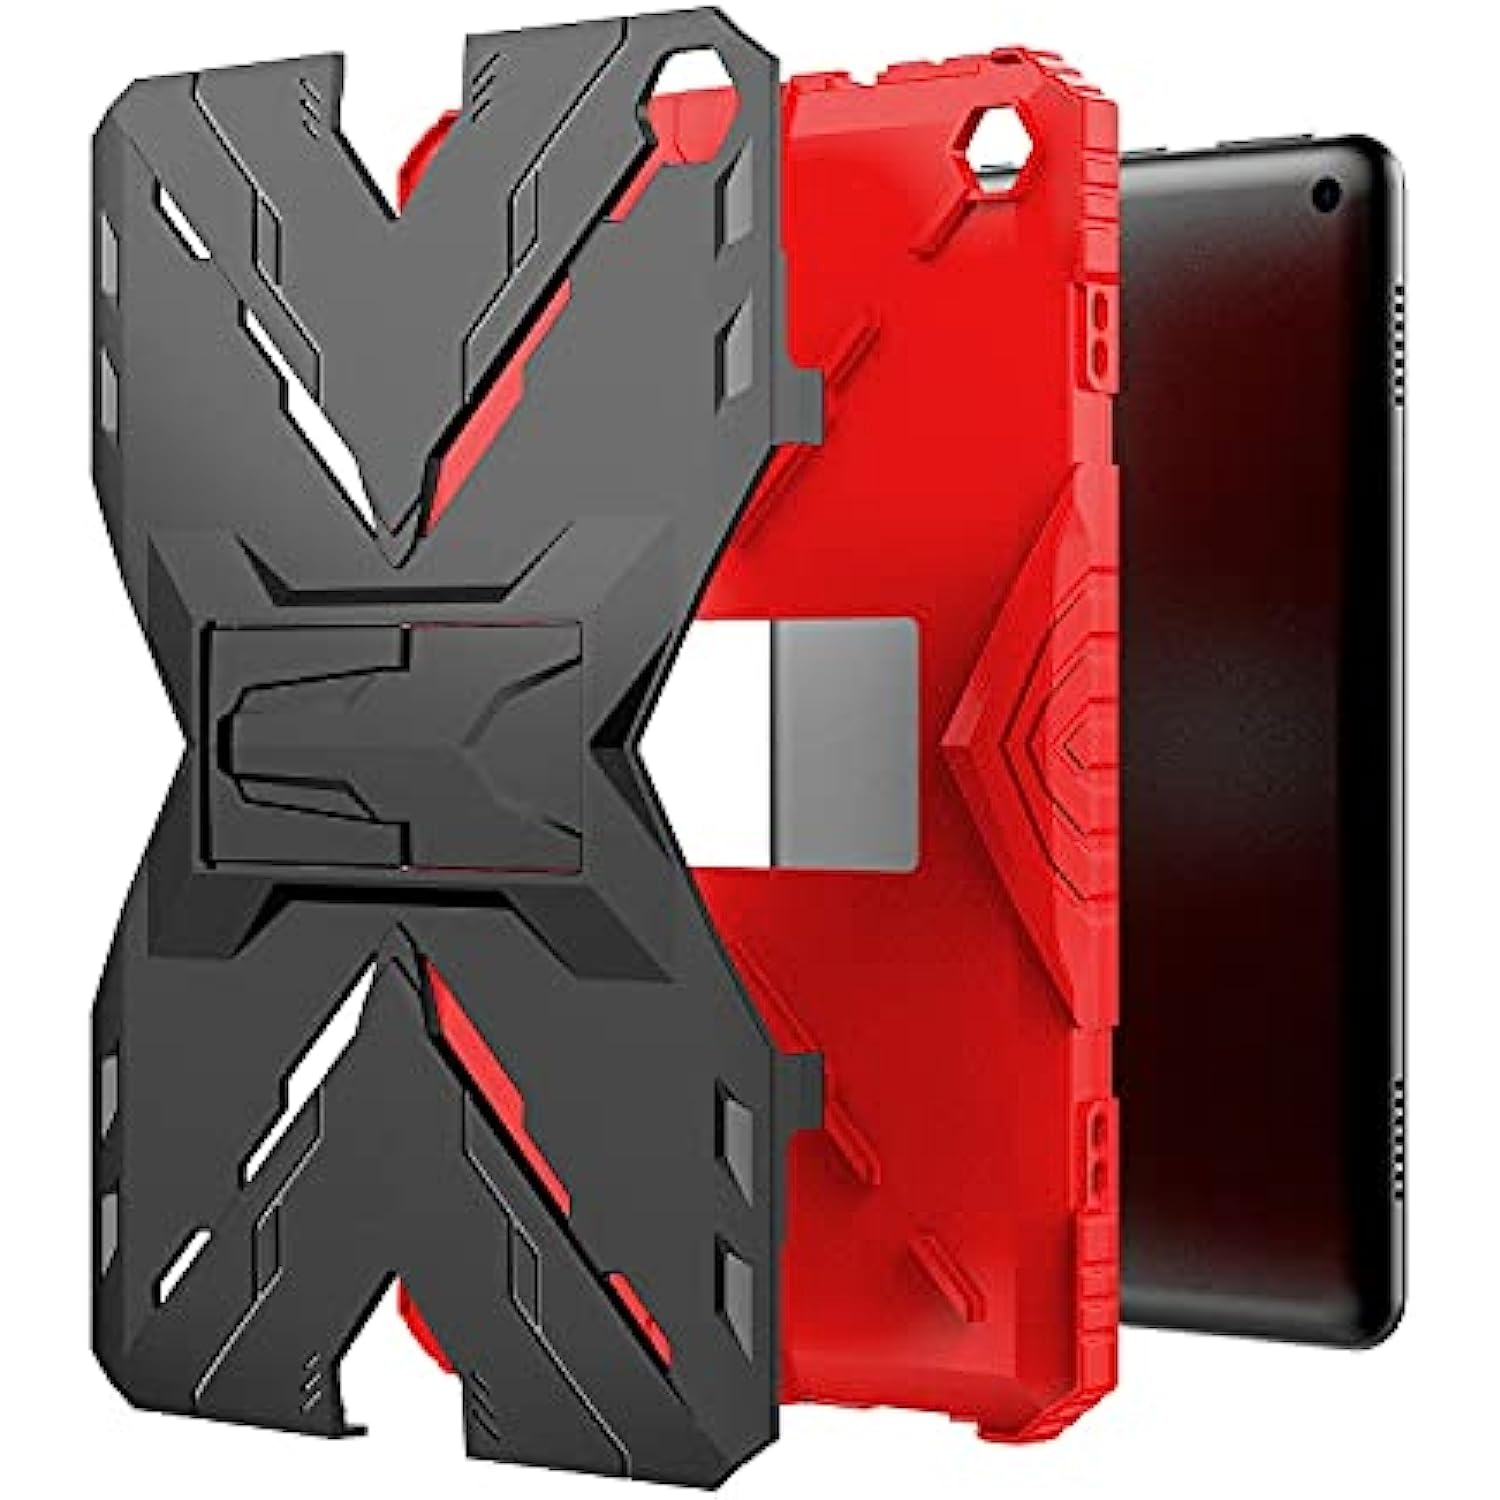 Kickstand Heavy Duty Armor Defender Cover for Kindle Fire HD 8 Case / HD 8 Plus Case 2020 Release 10th Generation